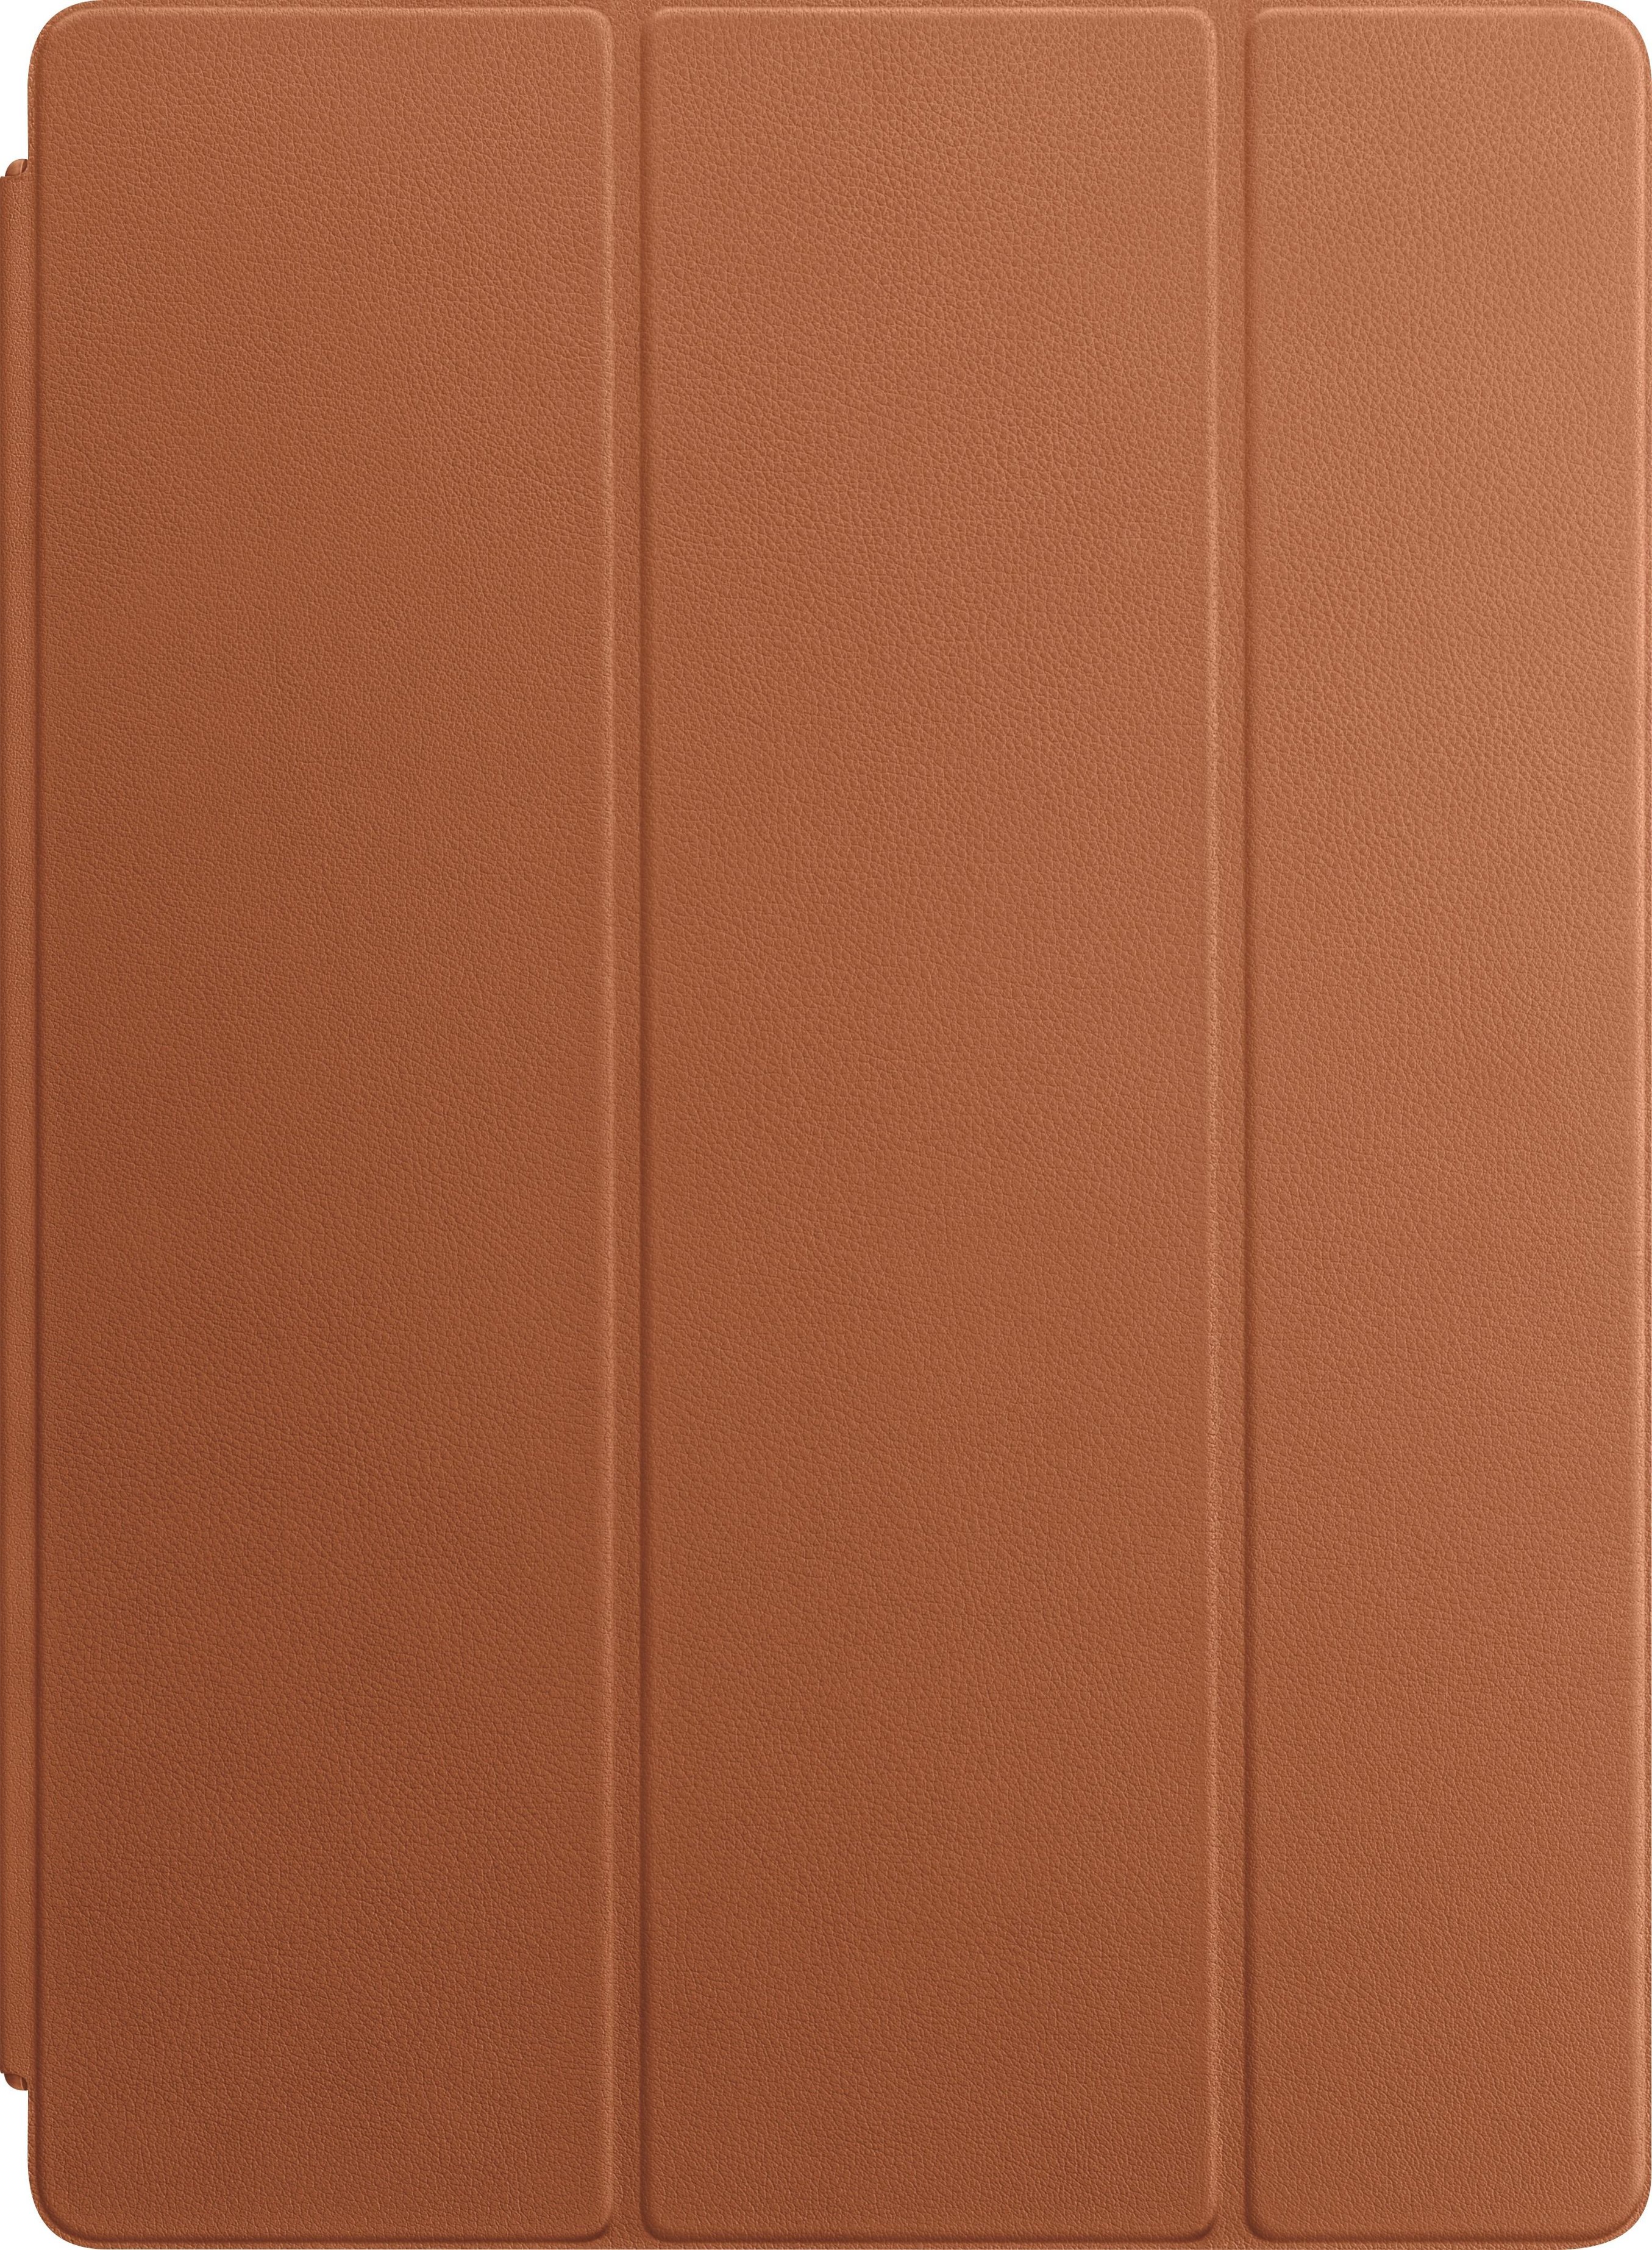 Leather Smart Cover for 12.9-inch iPad Pro - Saddle Brown - EOL [OPEN BOX]  - kite+key, Rutgers Tech Store